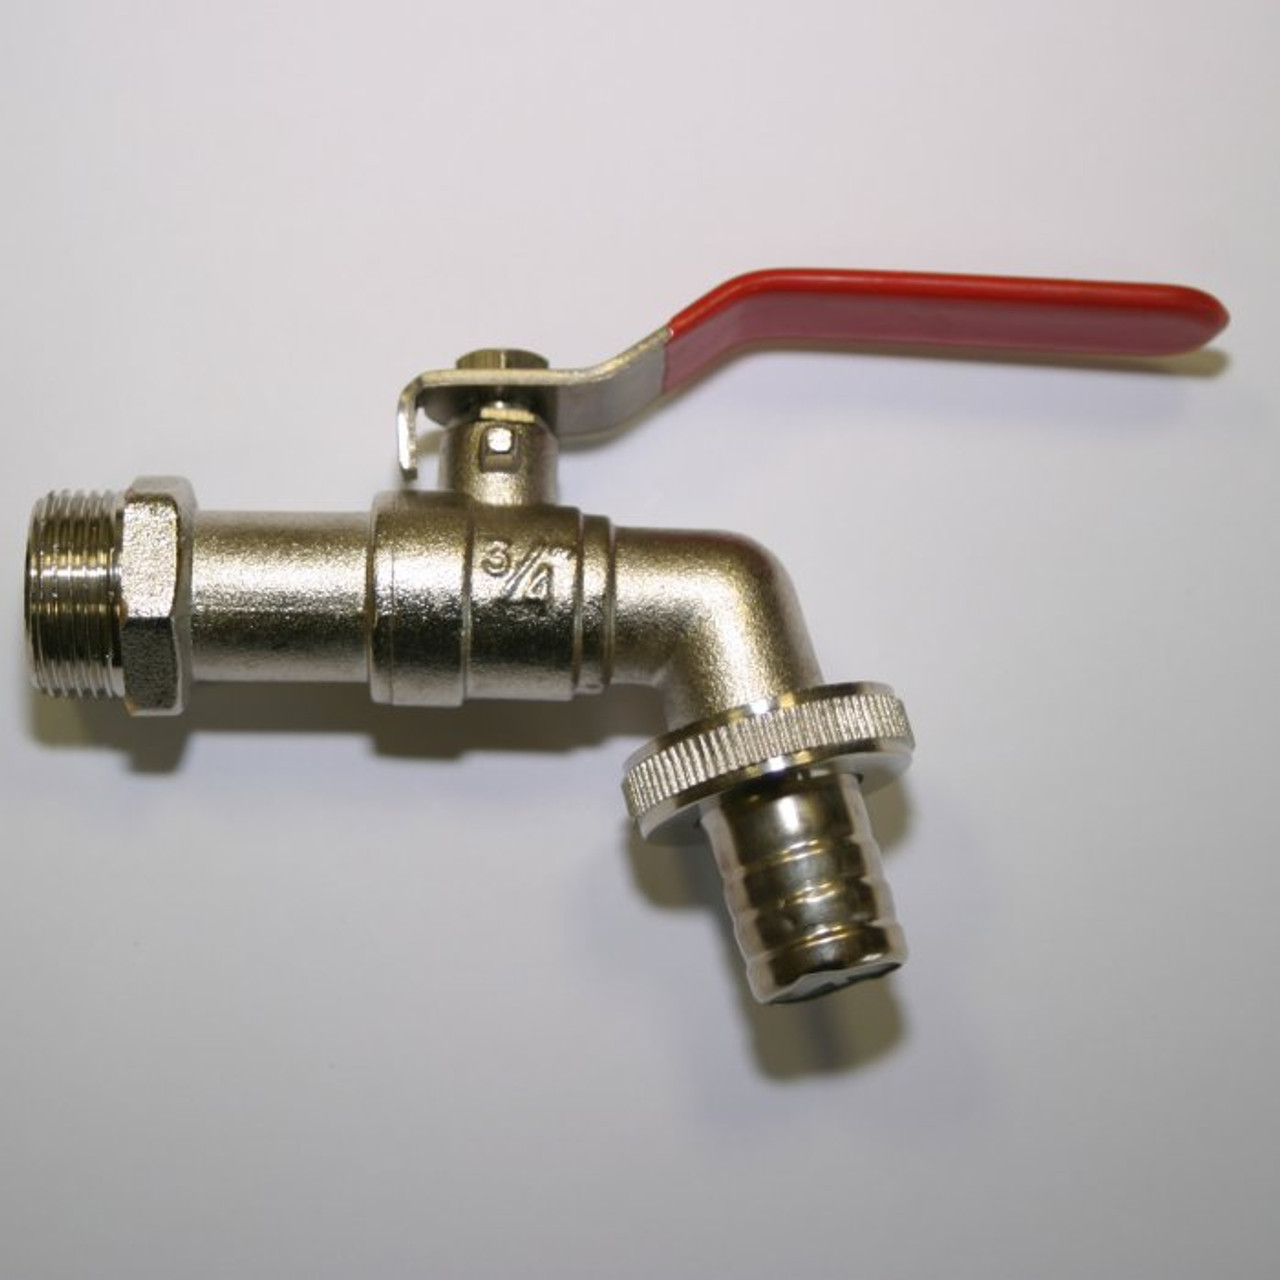 3/4" Metal Quarter-turn tap with Hosetail for Hose